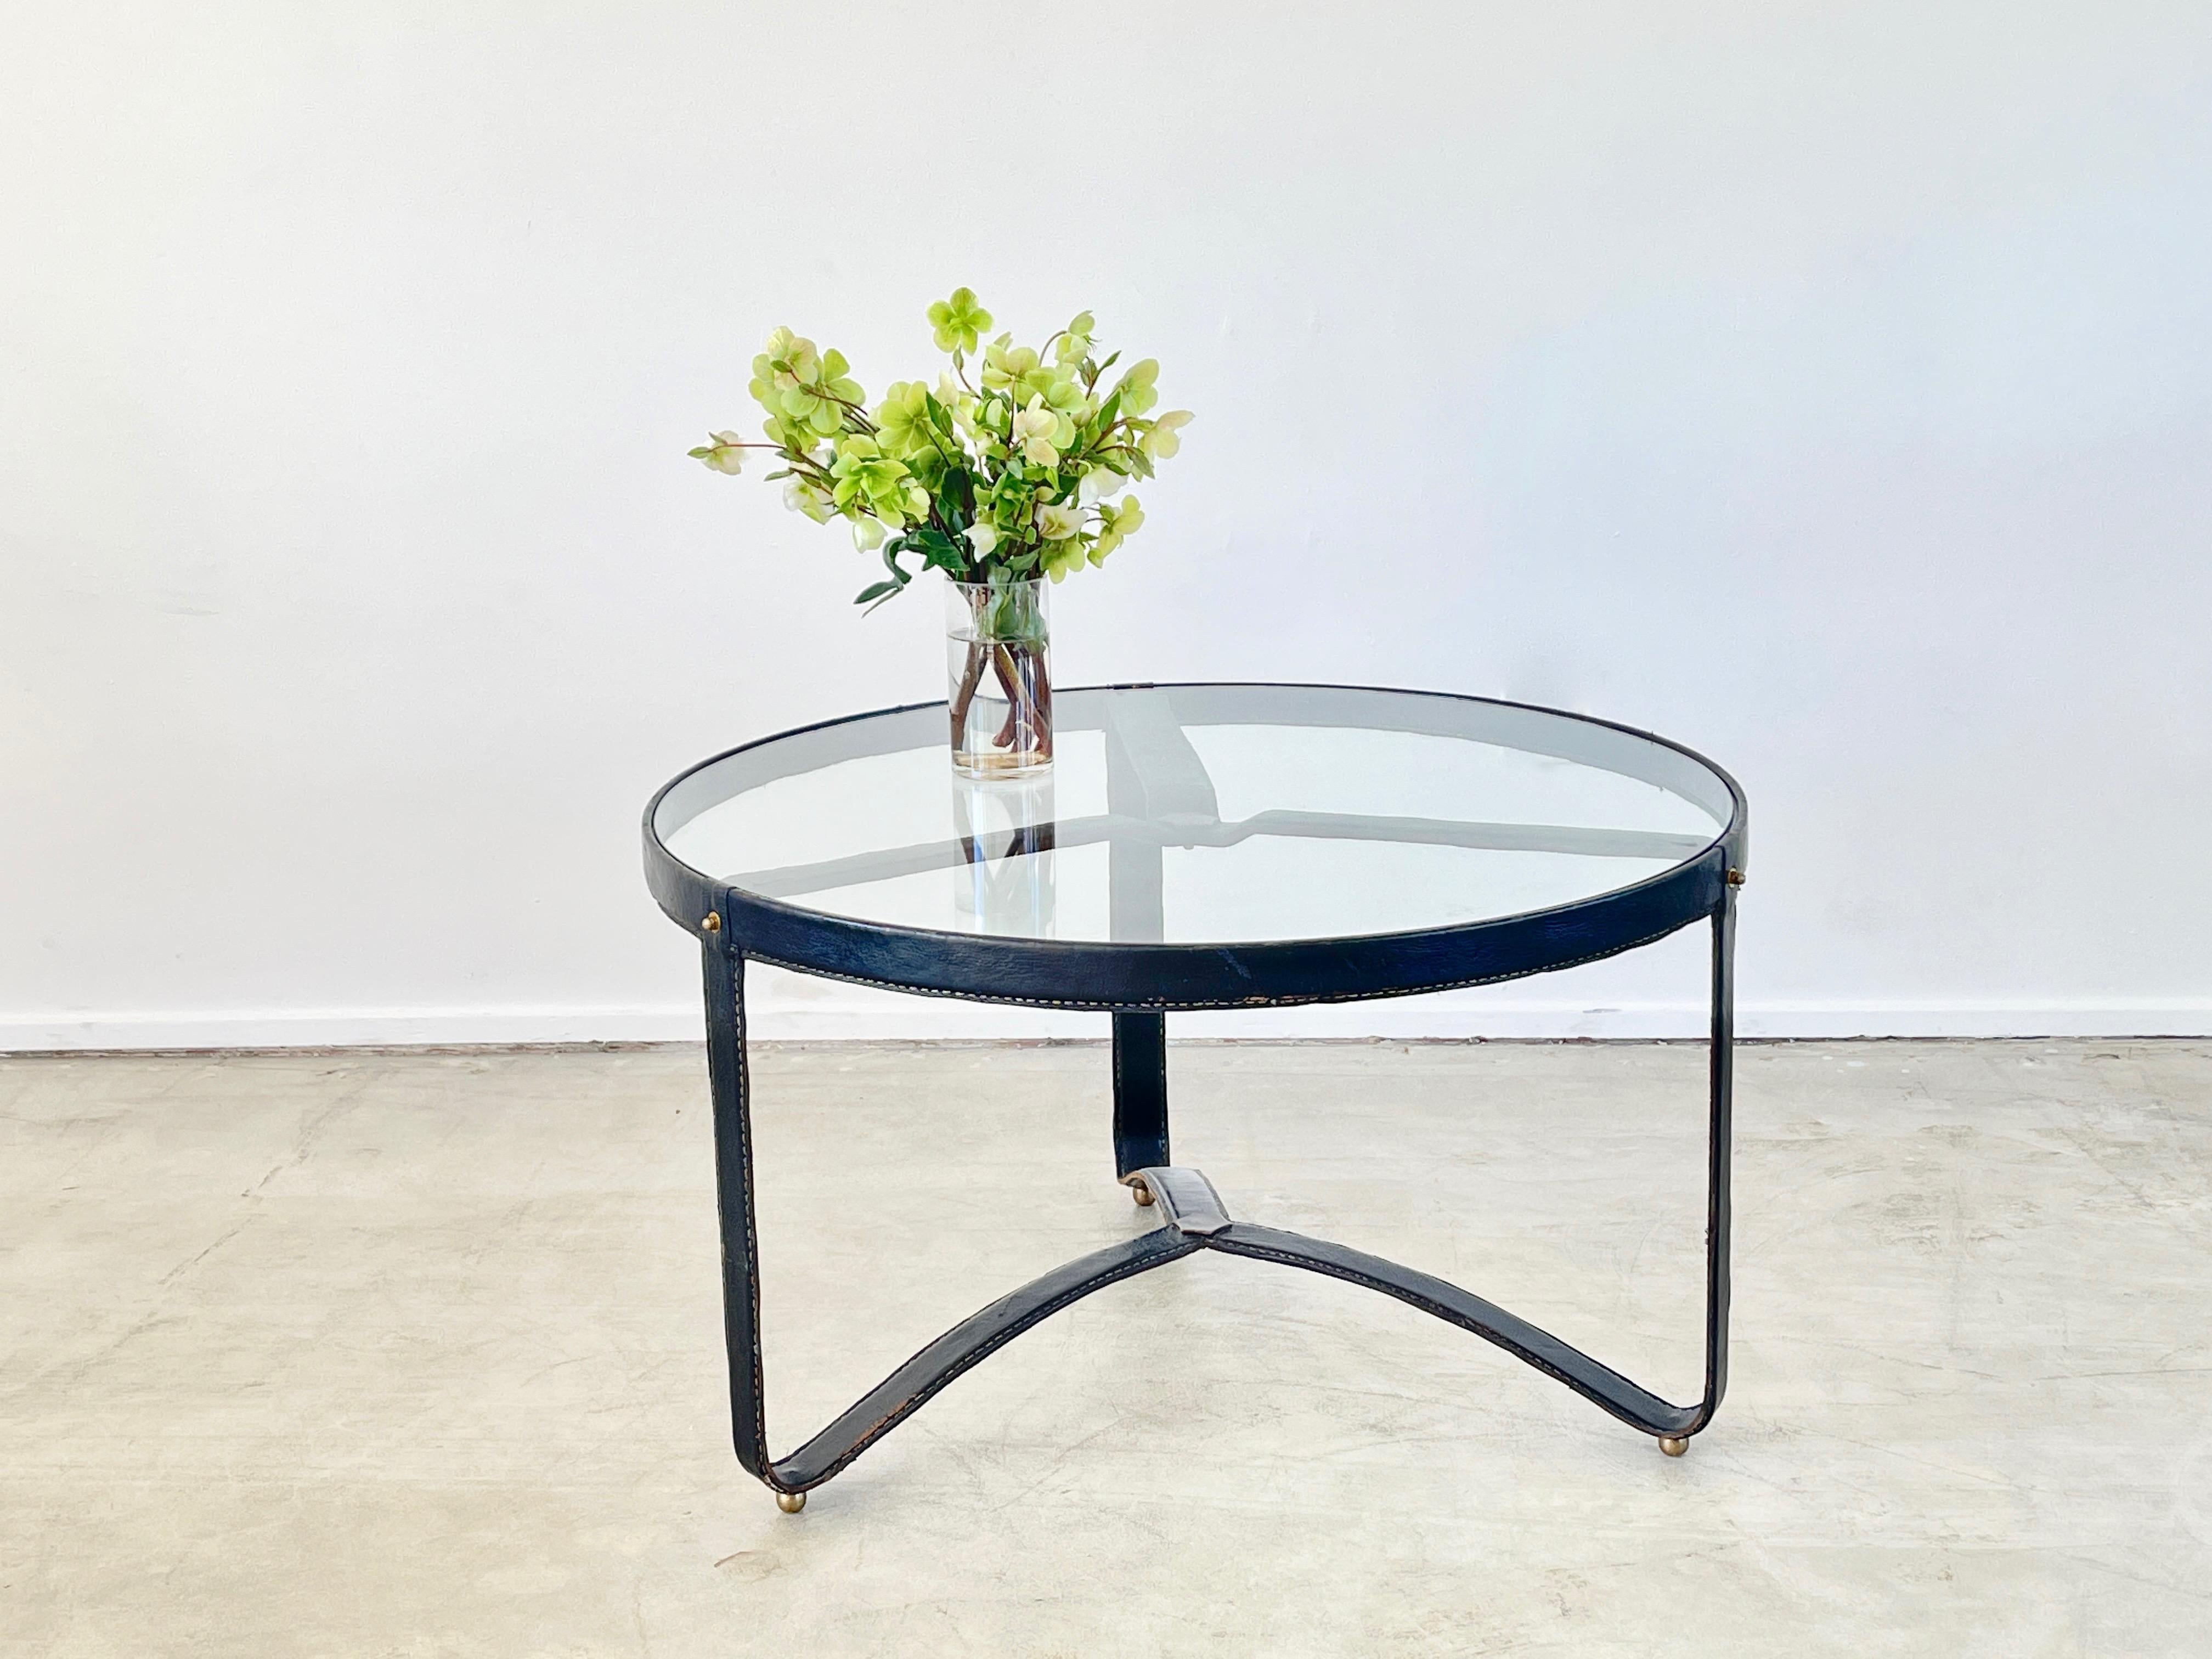 Jacques Adnet round coffee table with signature leather stitching, curved base and brass detailing
New glass top.